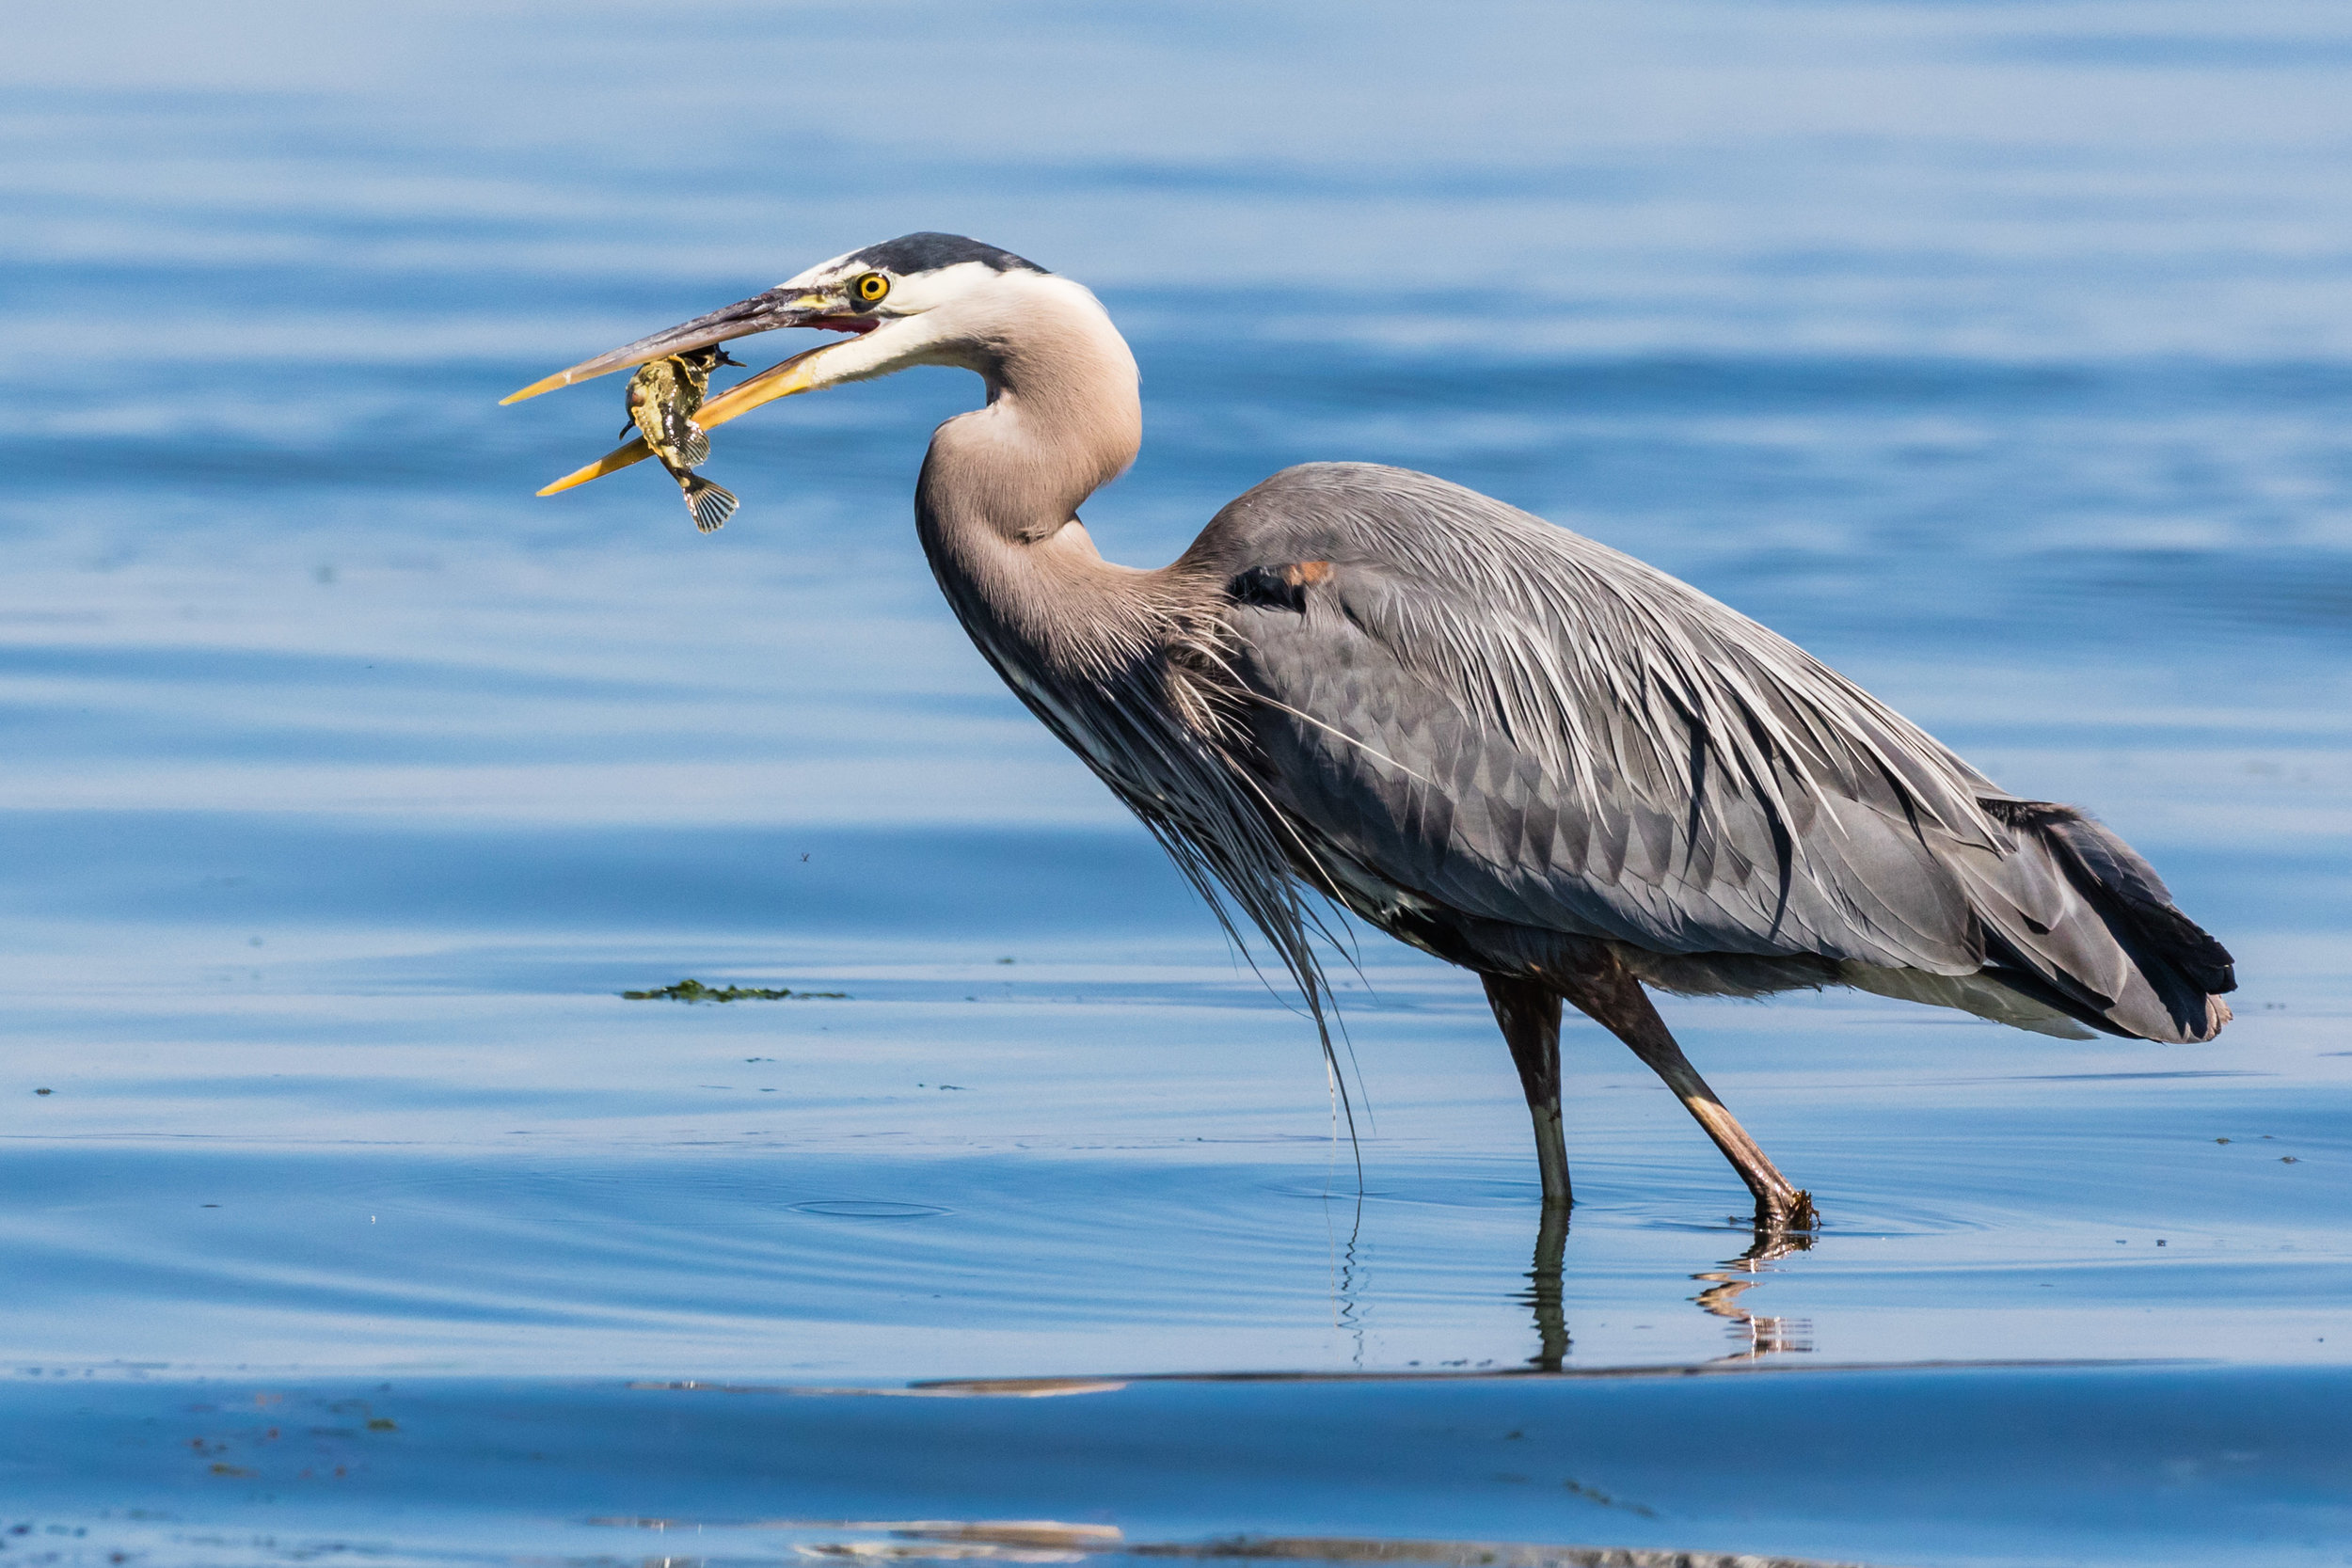 Heron with Fish, part 3